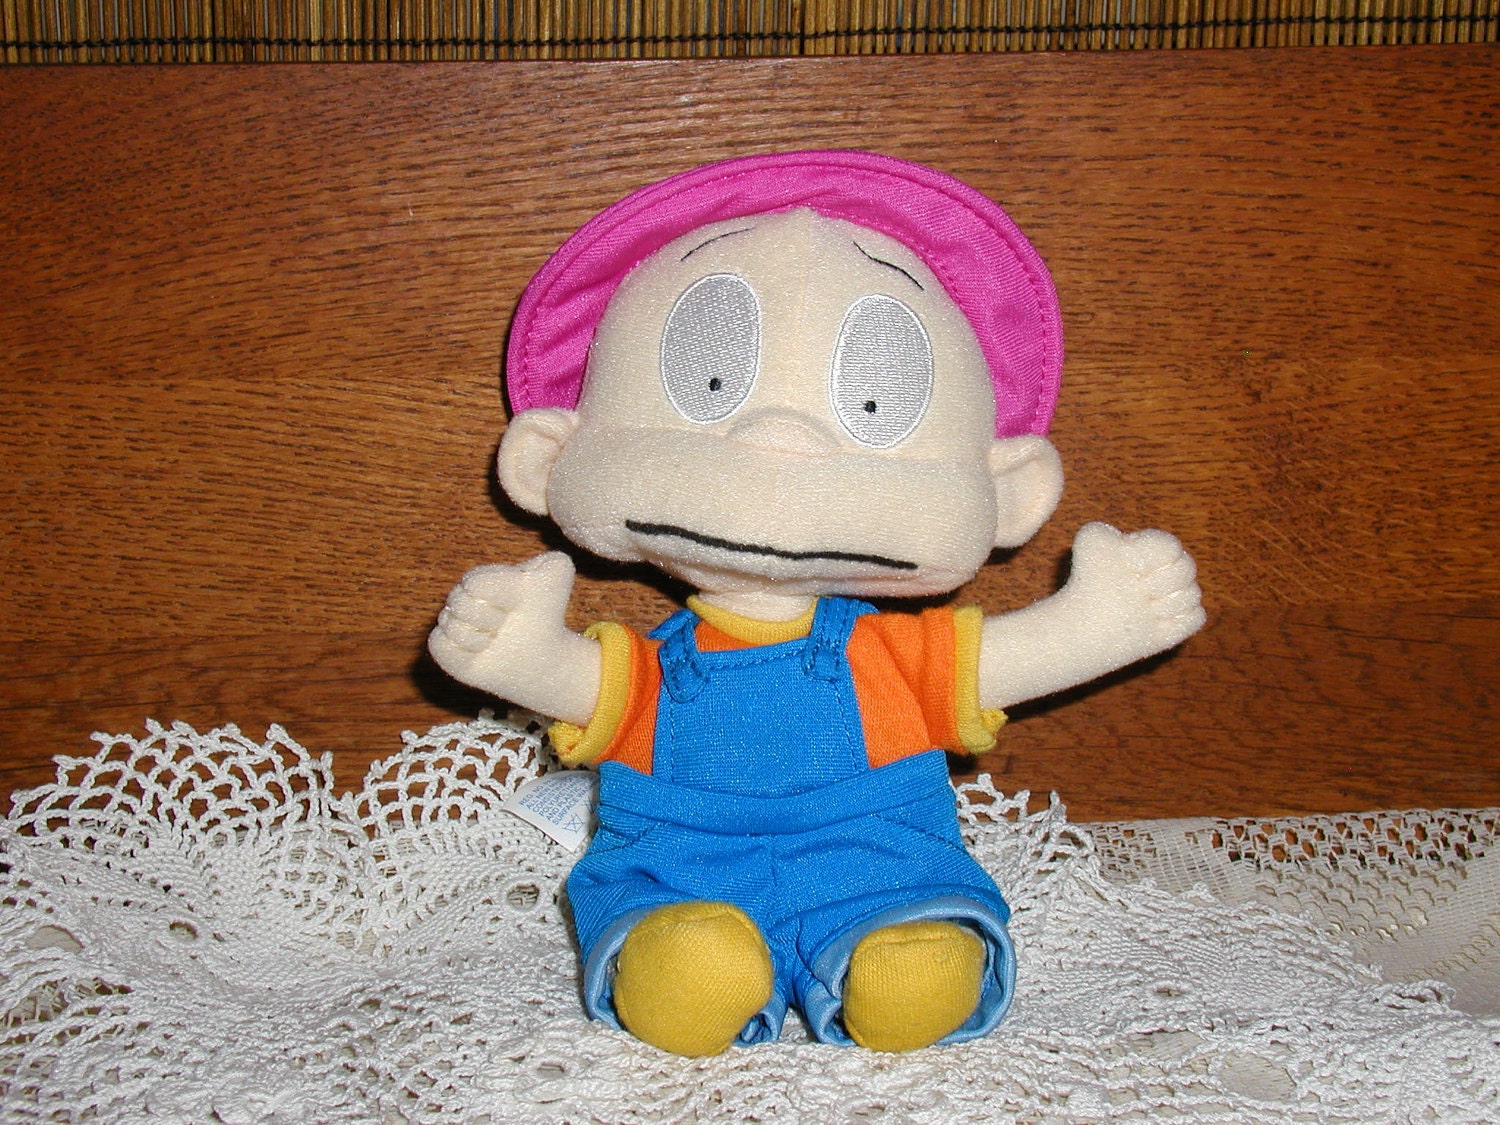 Rugrats Doll Dil Pickles By Scoodles On Etsy